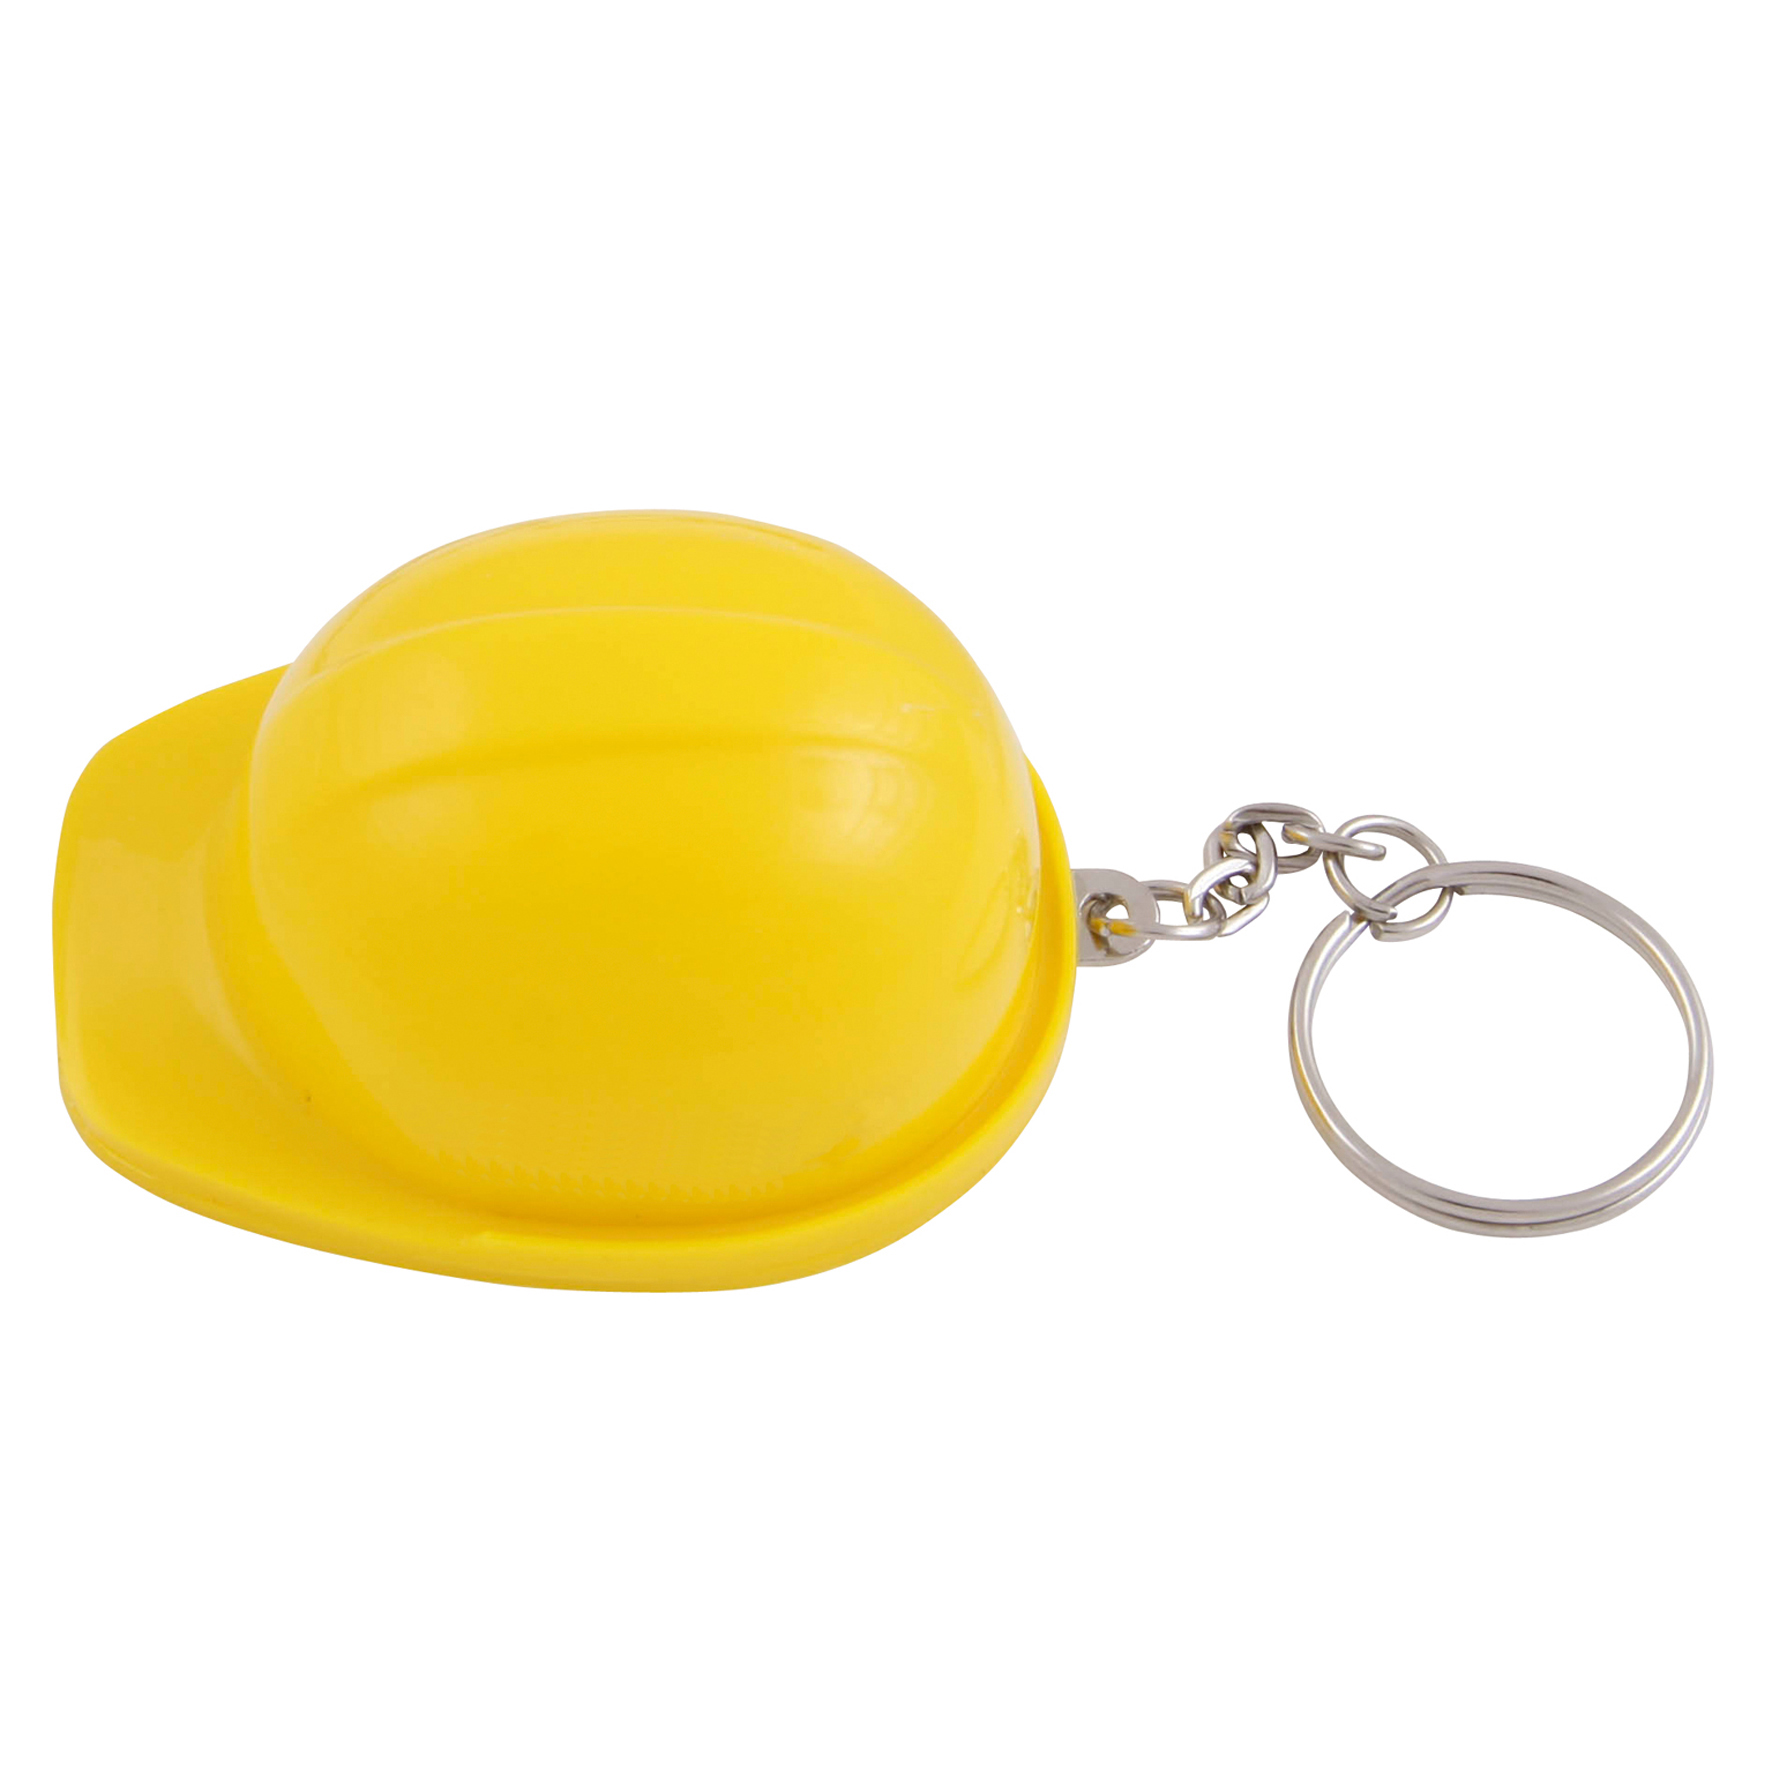 x819027 06 - Hard hat bottle opener and key chain